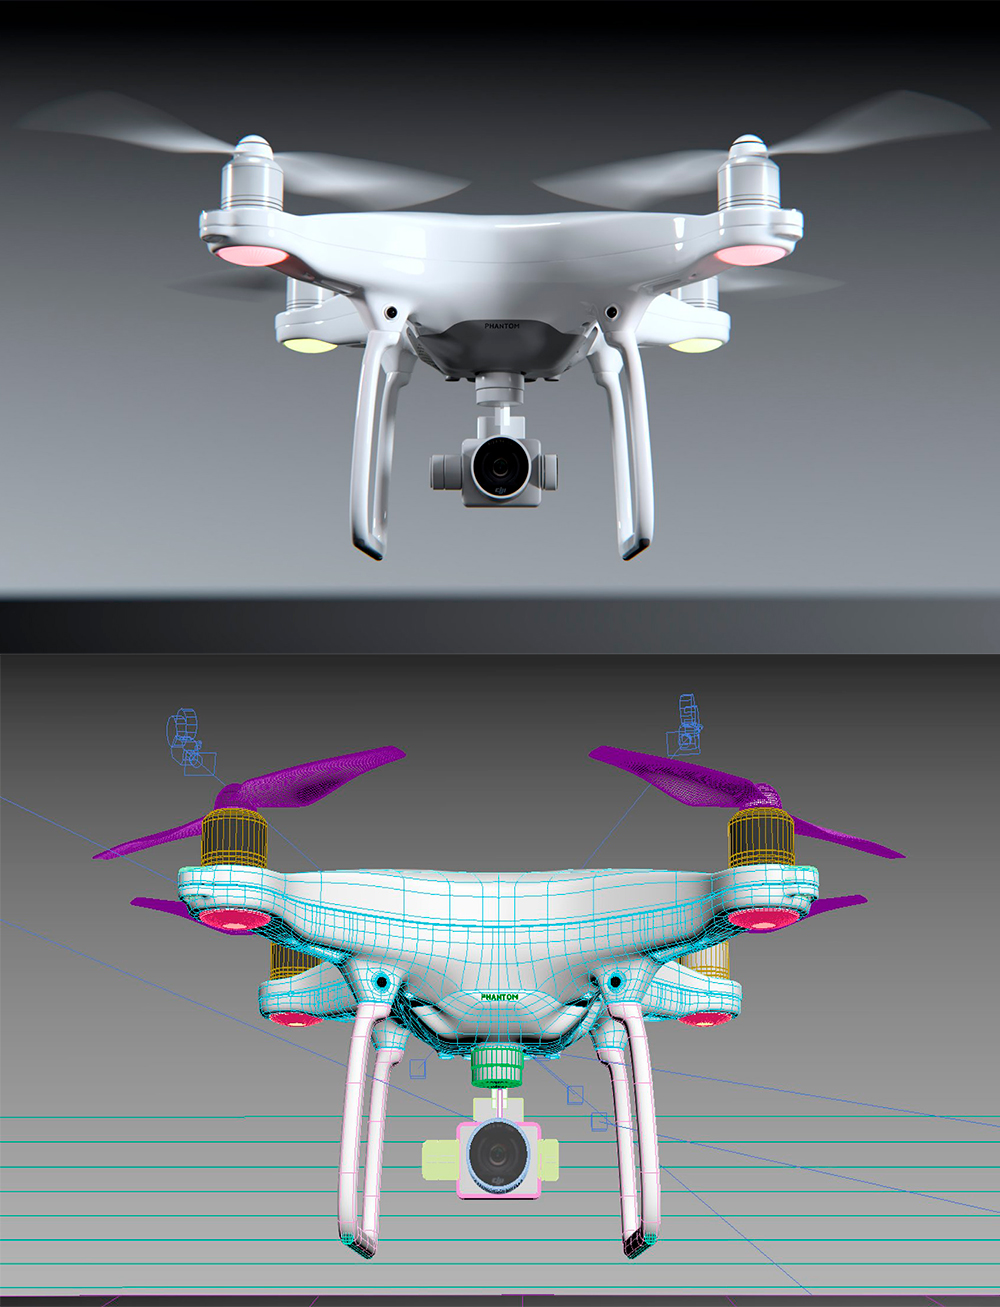 Rendering of a gorgeous 3d model of a white drone dji phantom 4